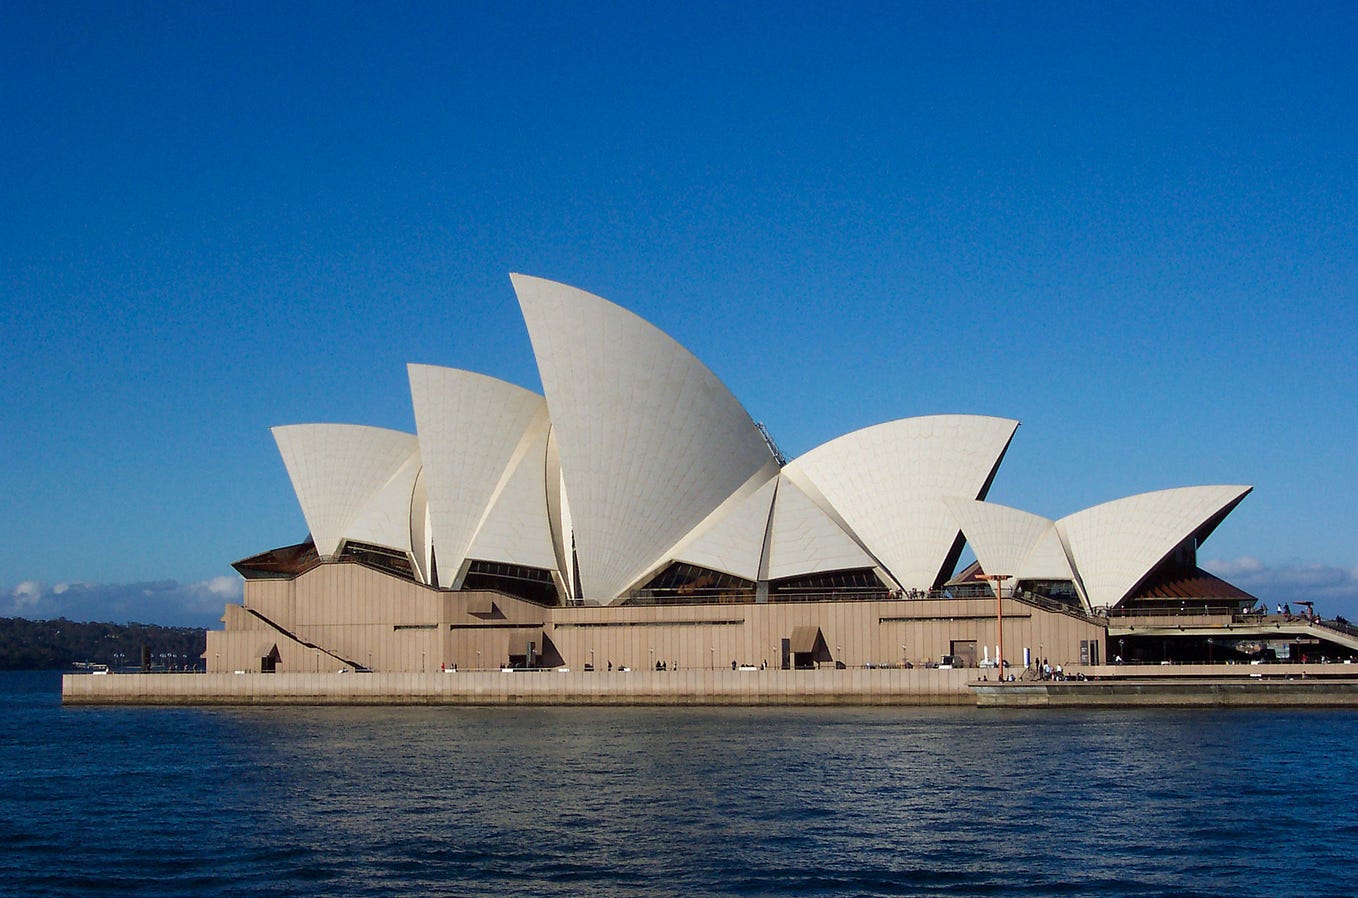 Design lessons from the Sydney Opera House